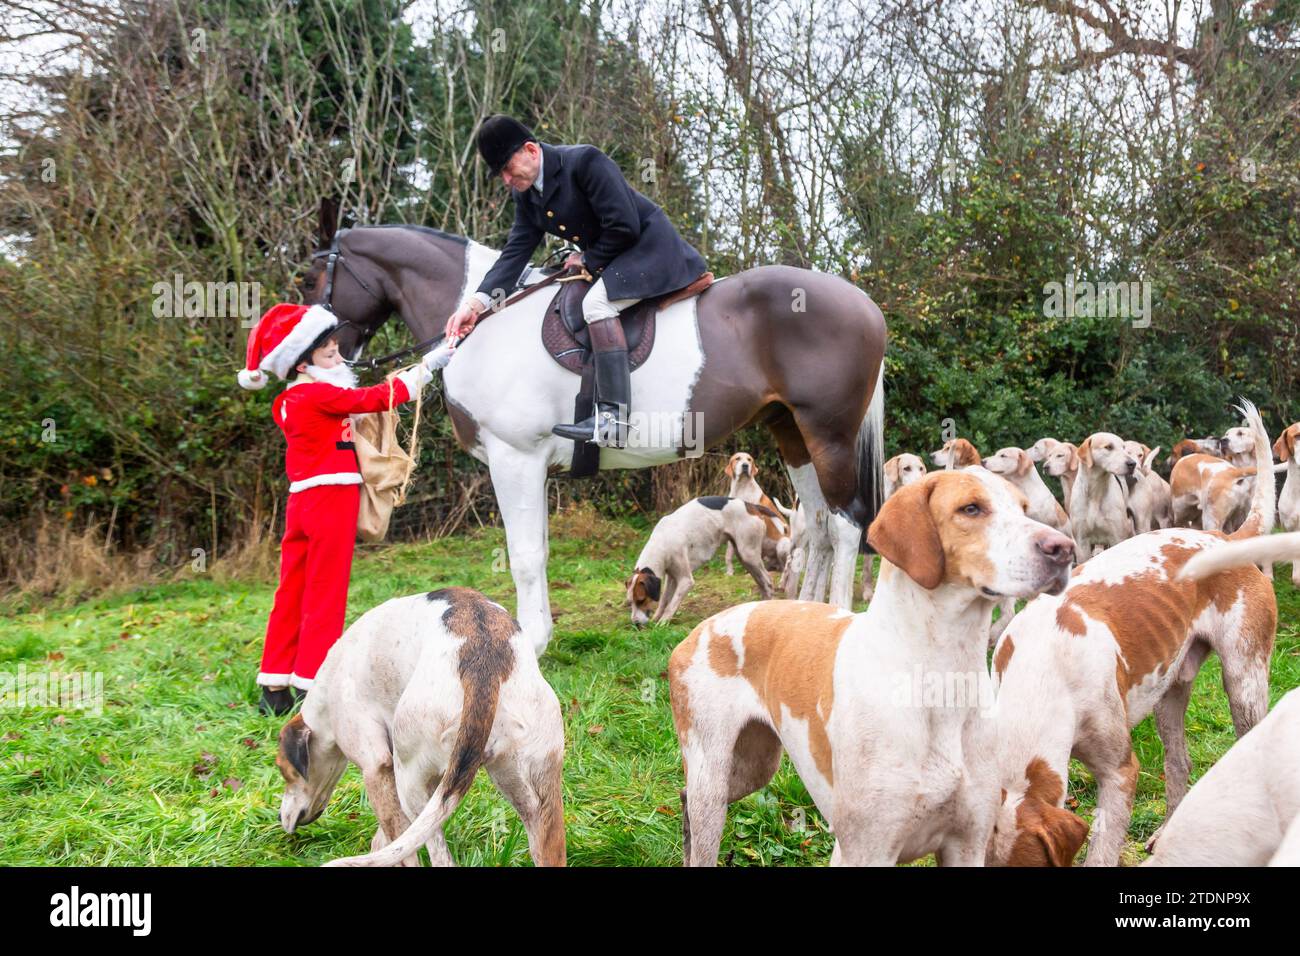 Upper Arley, Kidderminster, Worcestershire, UK. 19th Dec, 2023. 10-year-old Henley Mills dressed as Santa Claus hands a chocolate bar to the Master of the Foxhounds of the Albrighton and Woodland hunt as they have a lawn meet and trail ride from a farm in Upper Arley, near Kidderminster in Worcestershire. Credit: Peter Lopeman/Alamy Live News Stock Photo